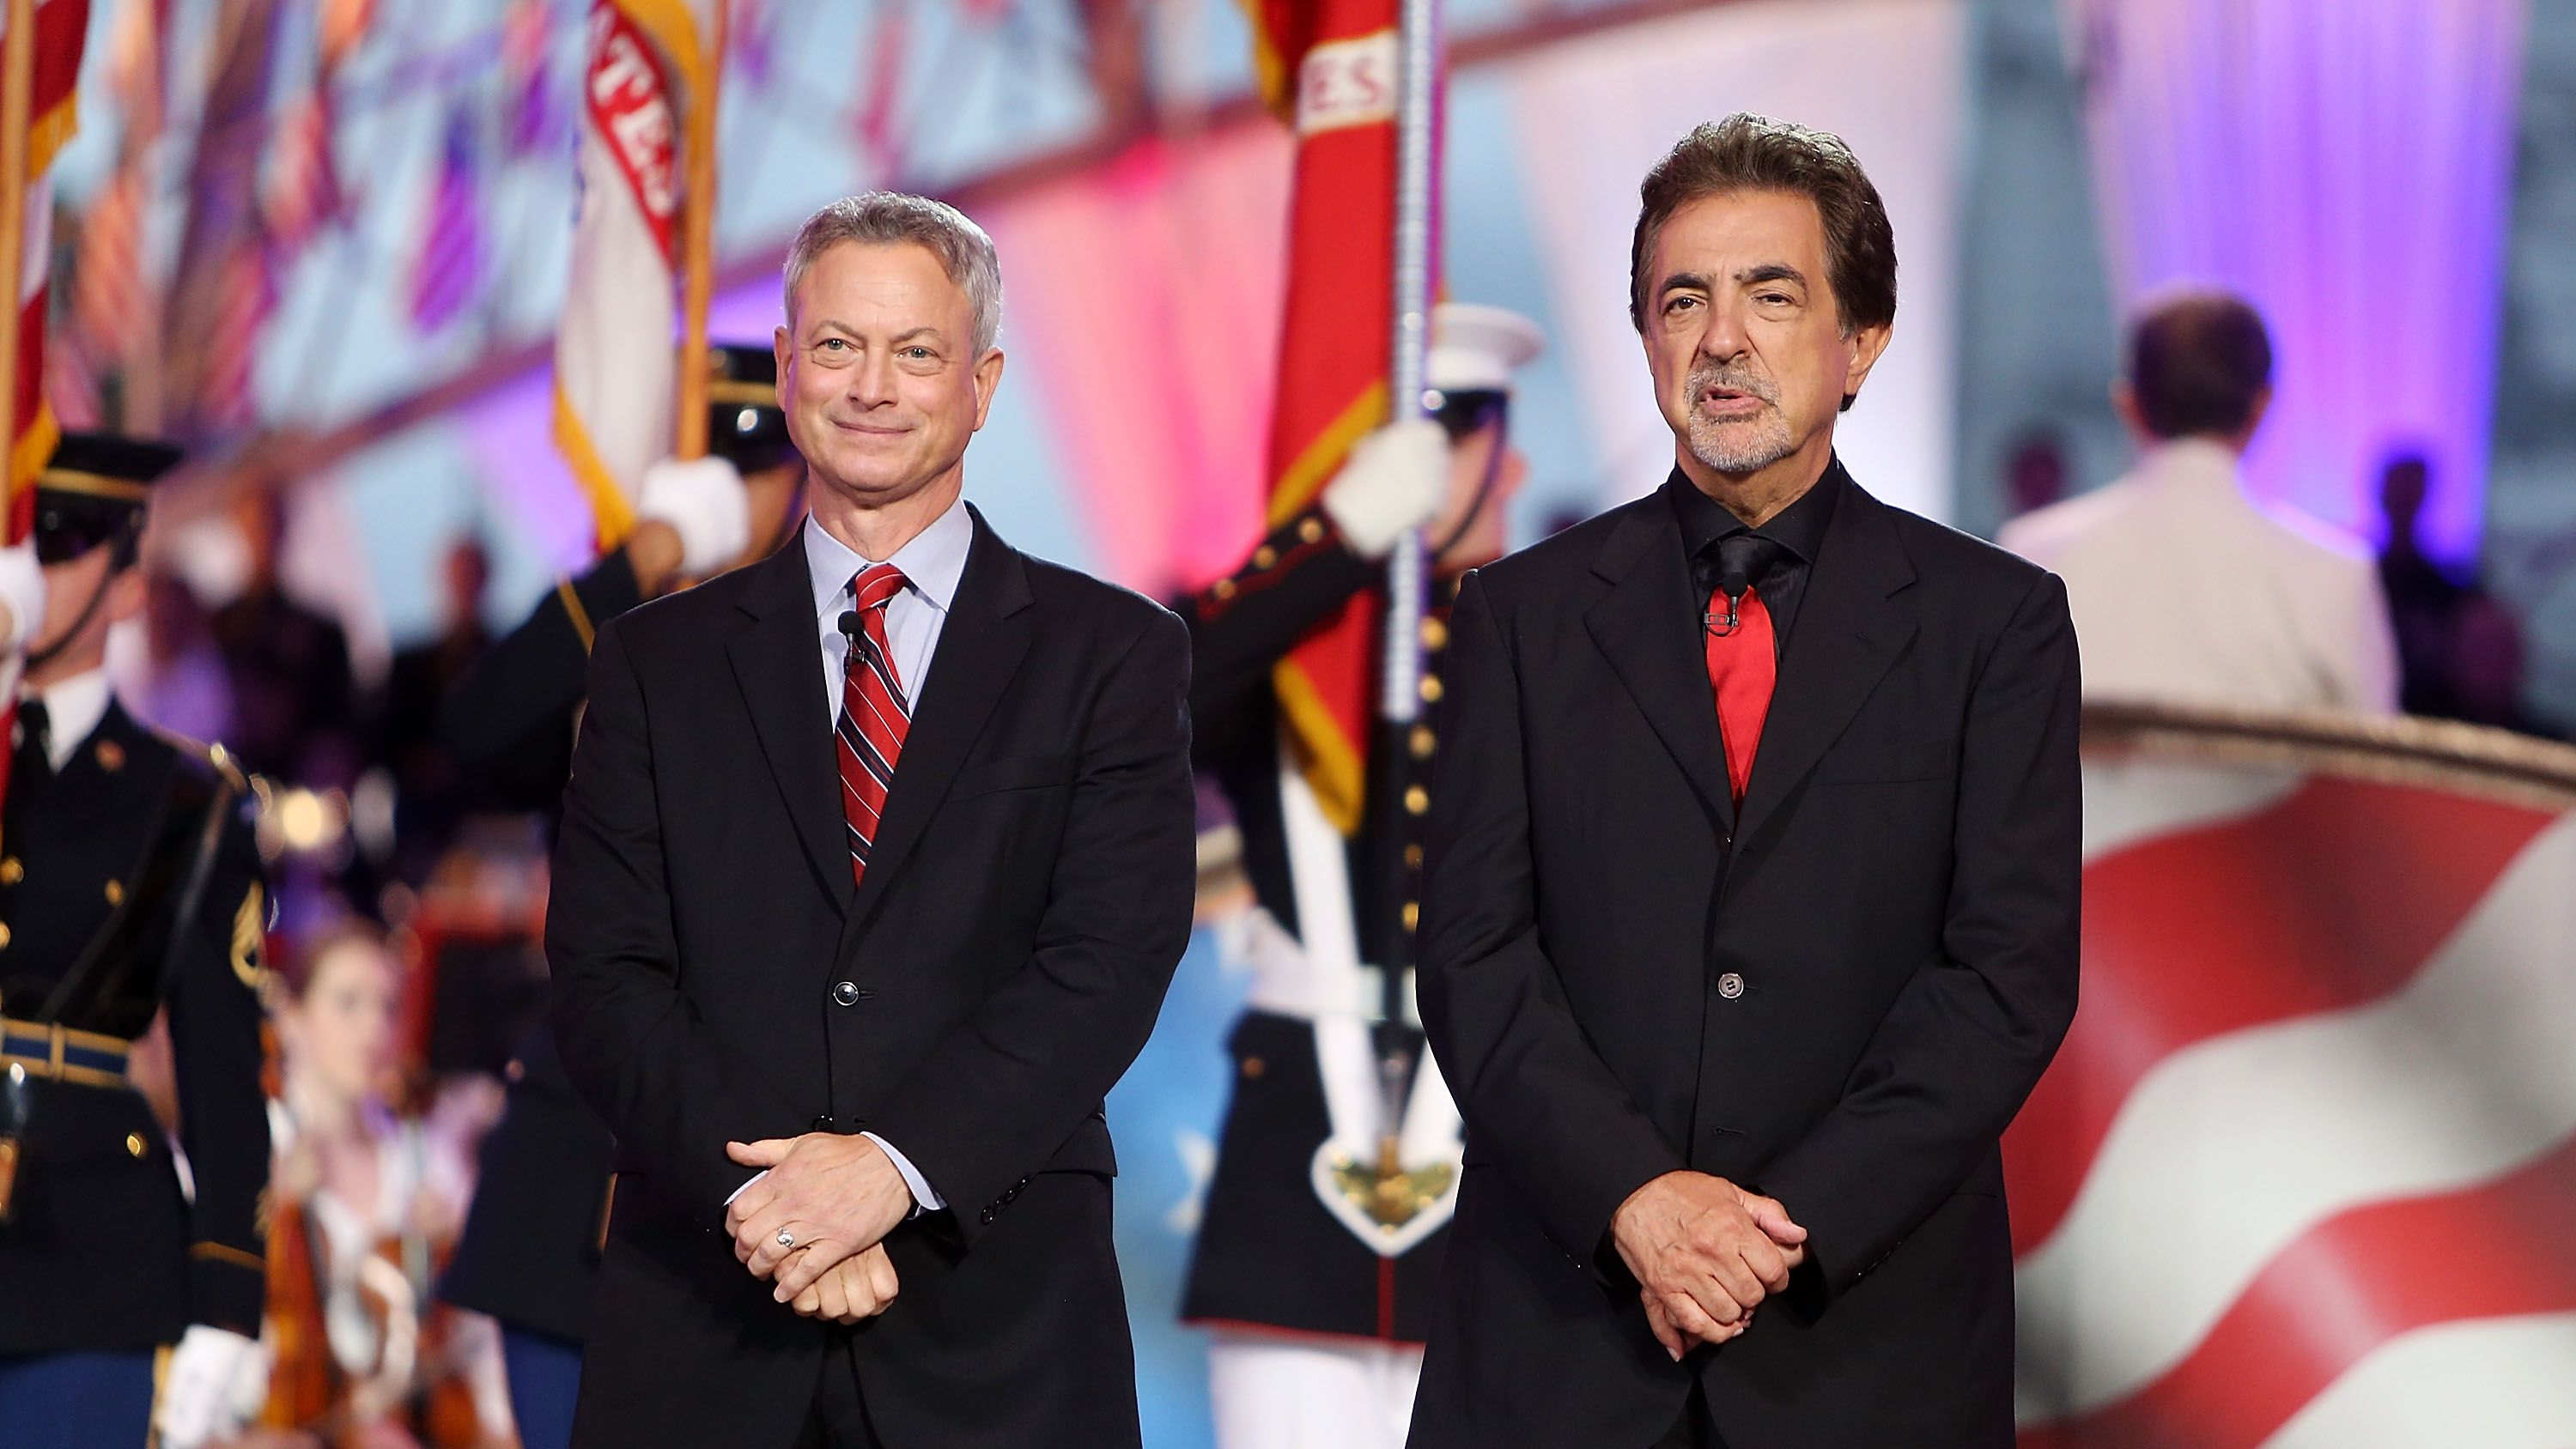 https://hips.hearstapps.com/hmg-prod/images/actors-and-co-hosts-gary-sinise-and-joe-mantegna-onstage-at-news-photo-1590070449.jpg?crop=1xw:0.7975xh;center,top